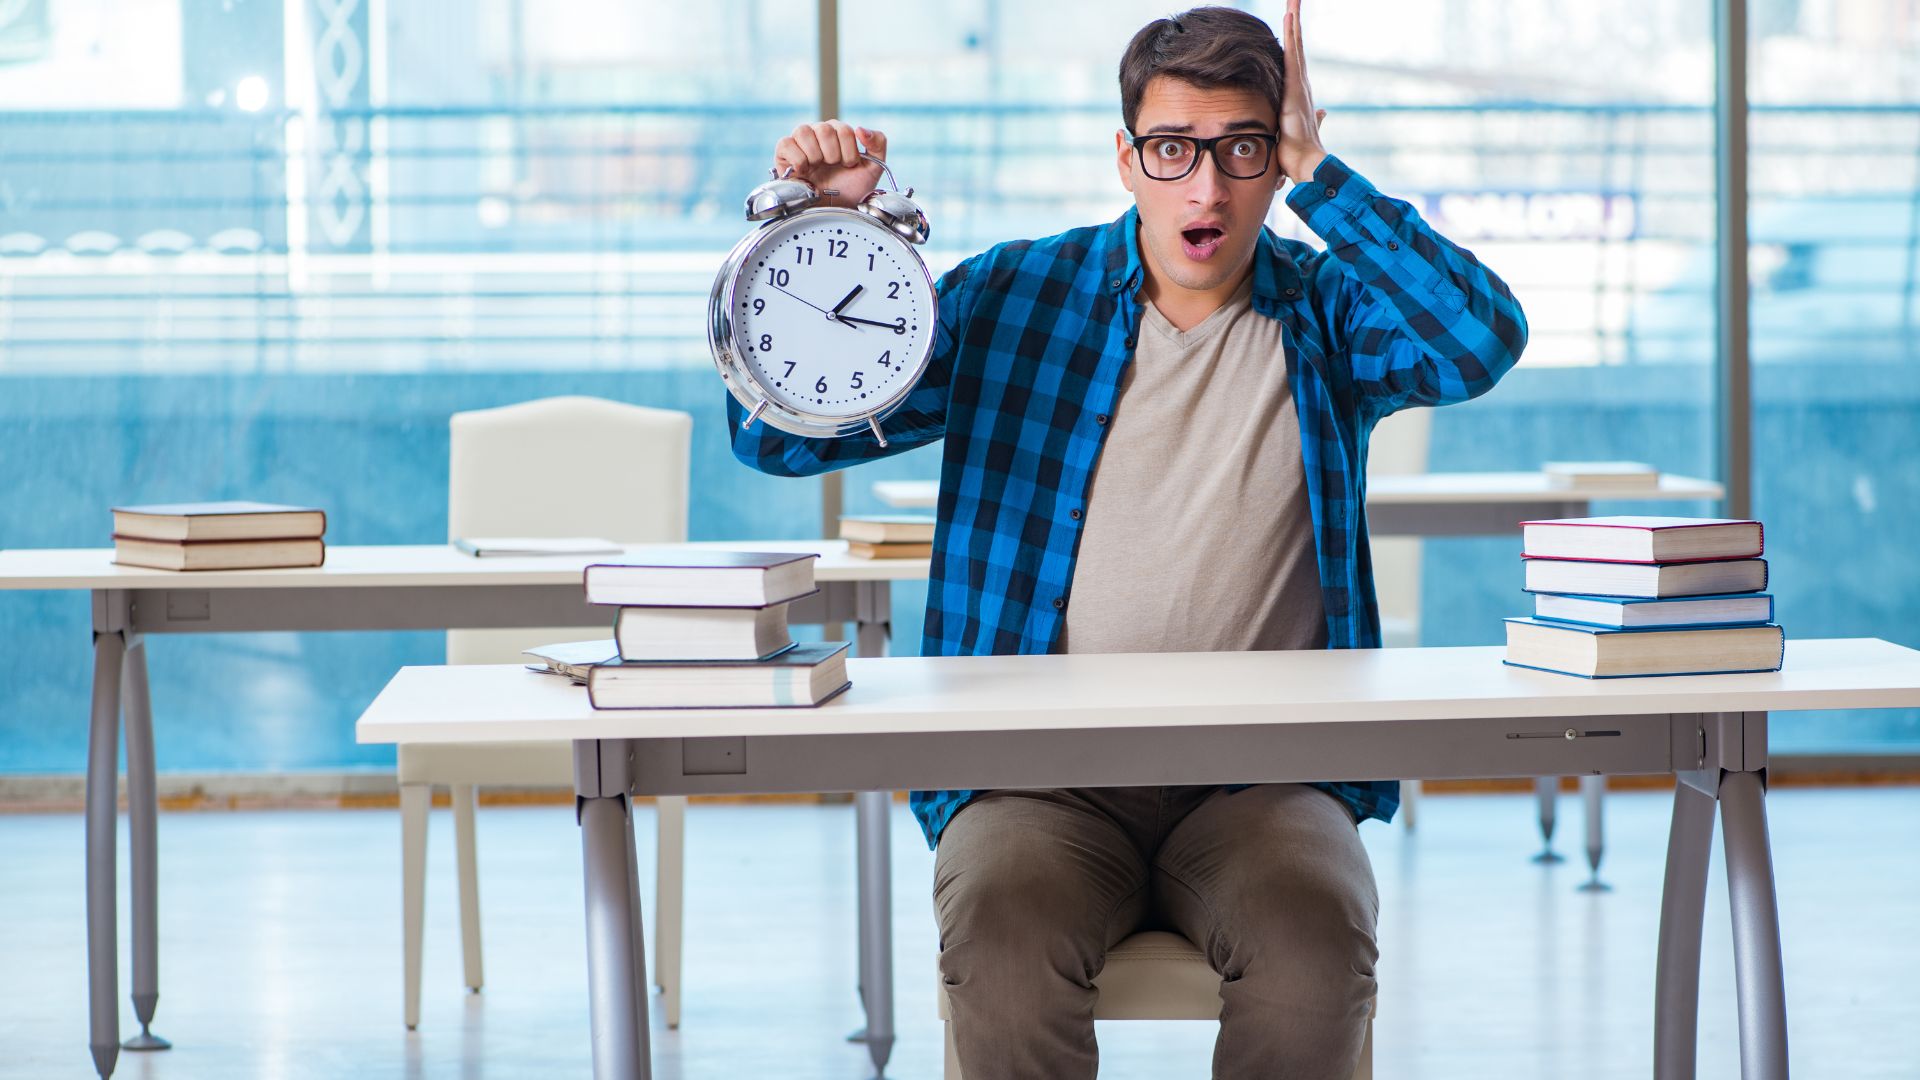 a college student sitting at a table with books while holding a clock and seemingly overwhelmed by a lack of time management skills